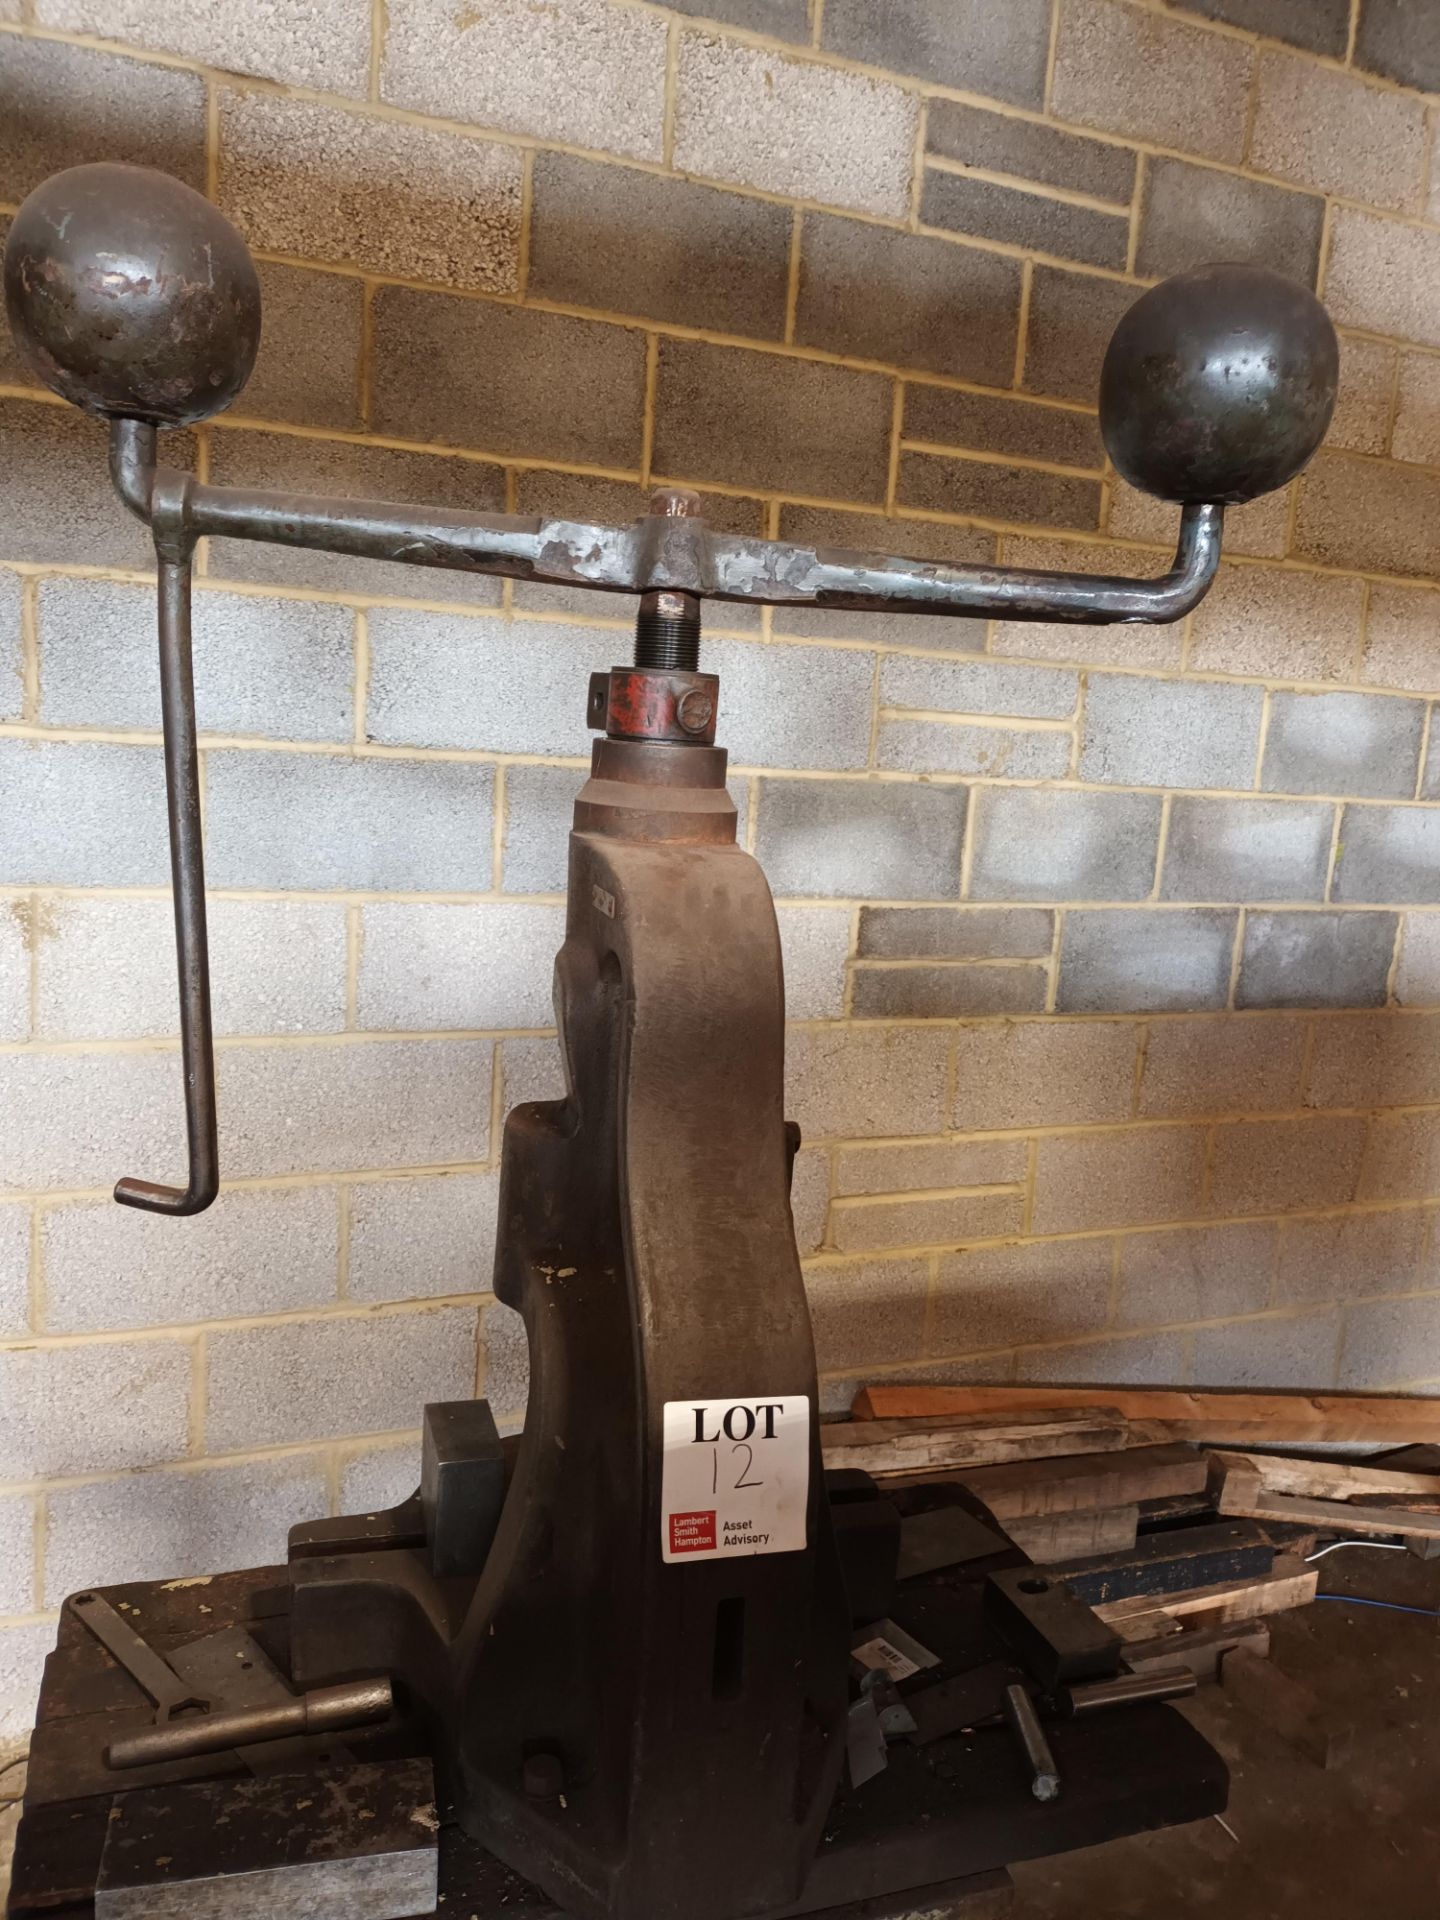 Norton No. 6 fly press on steel stand